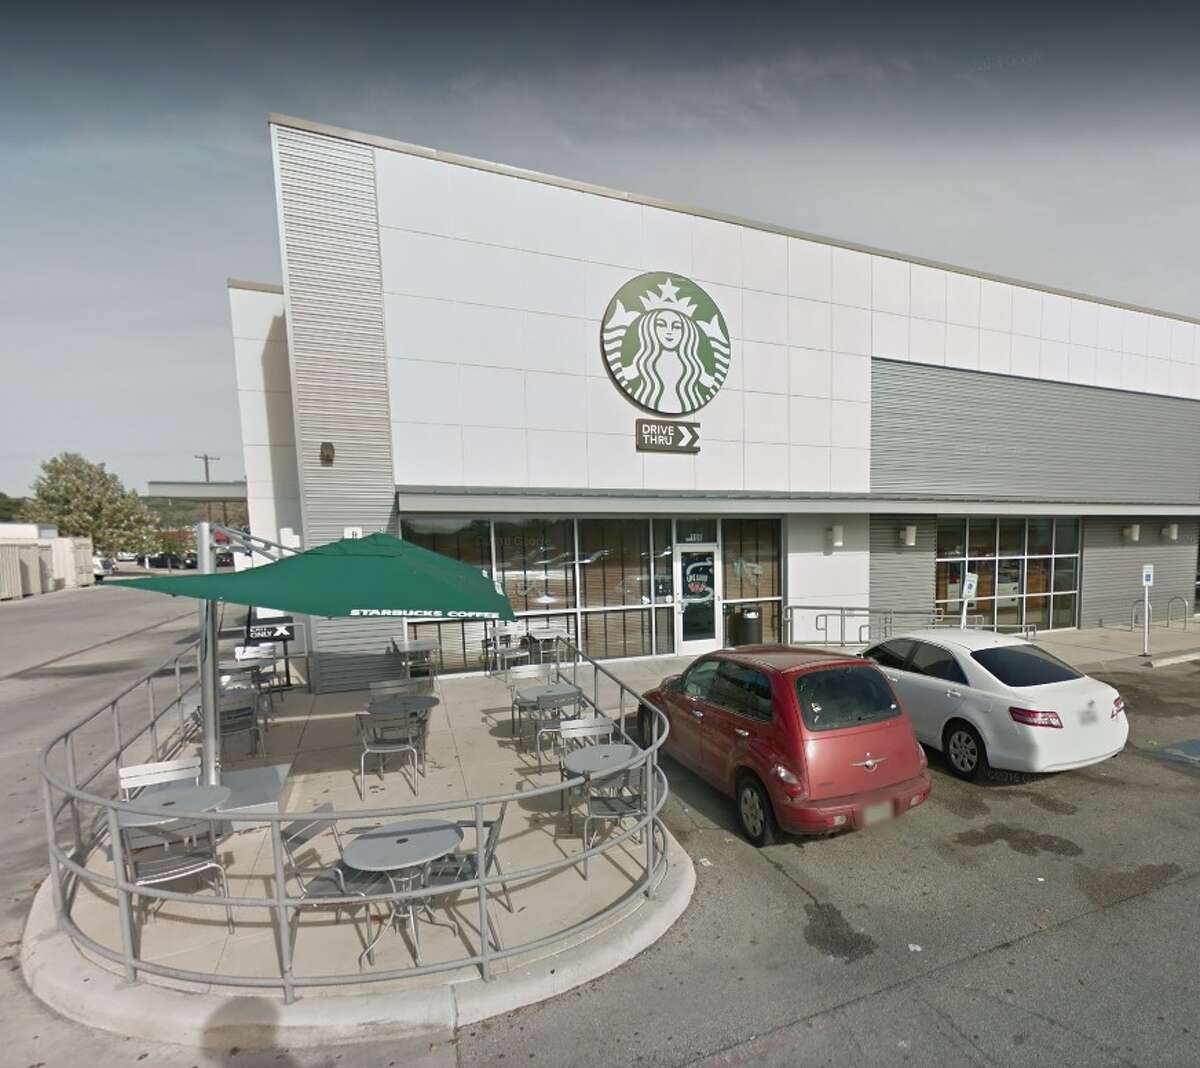 28-year-old Sean Carlton Lacey is accused of robbing this Starbucks located off Loop 410 and Vance Jackson. He was arrested on September 26, 2018.